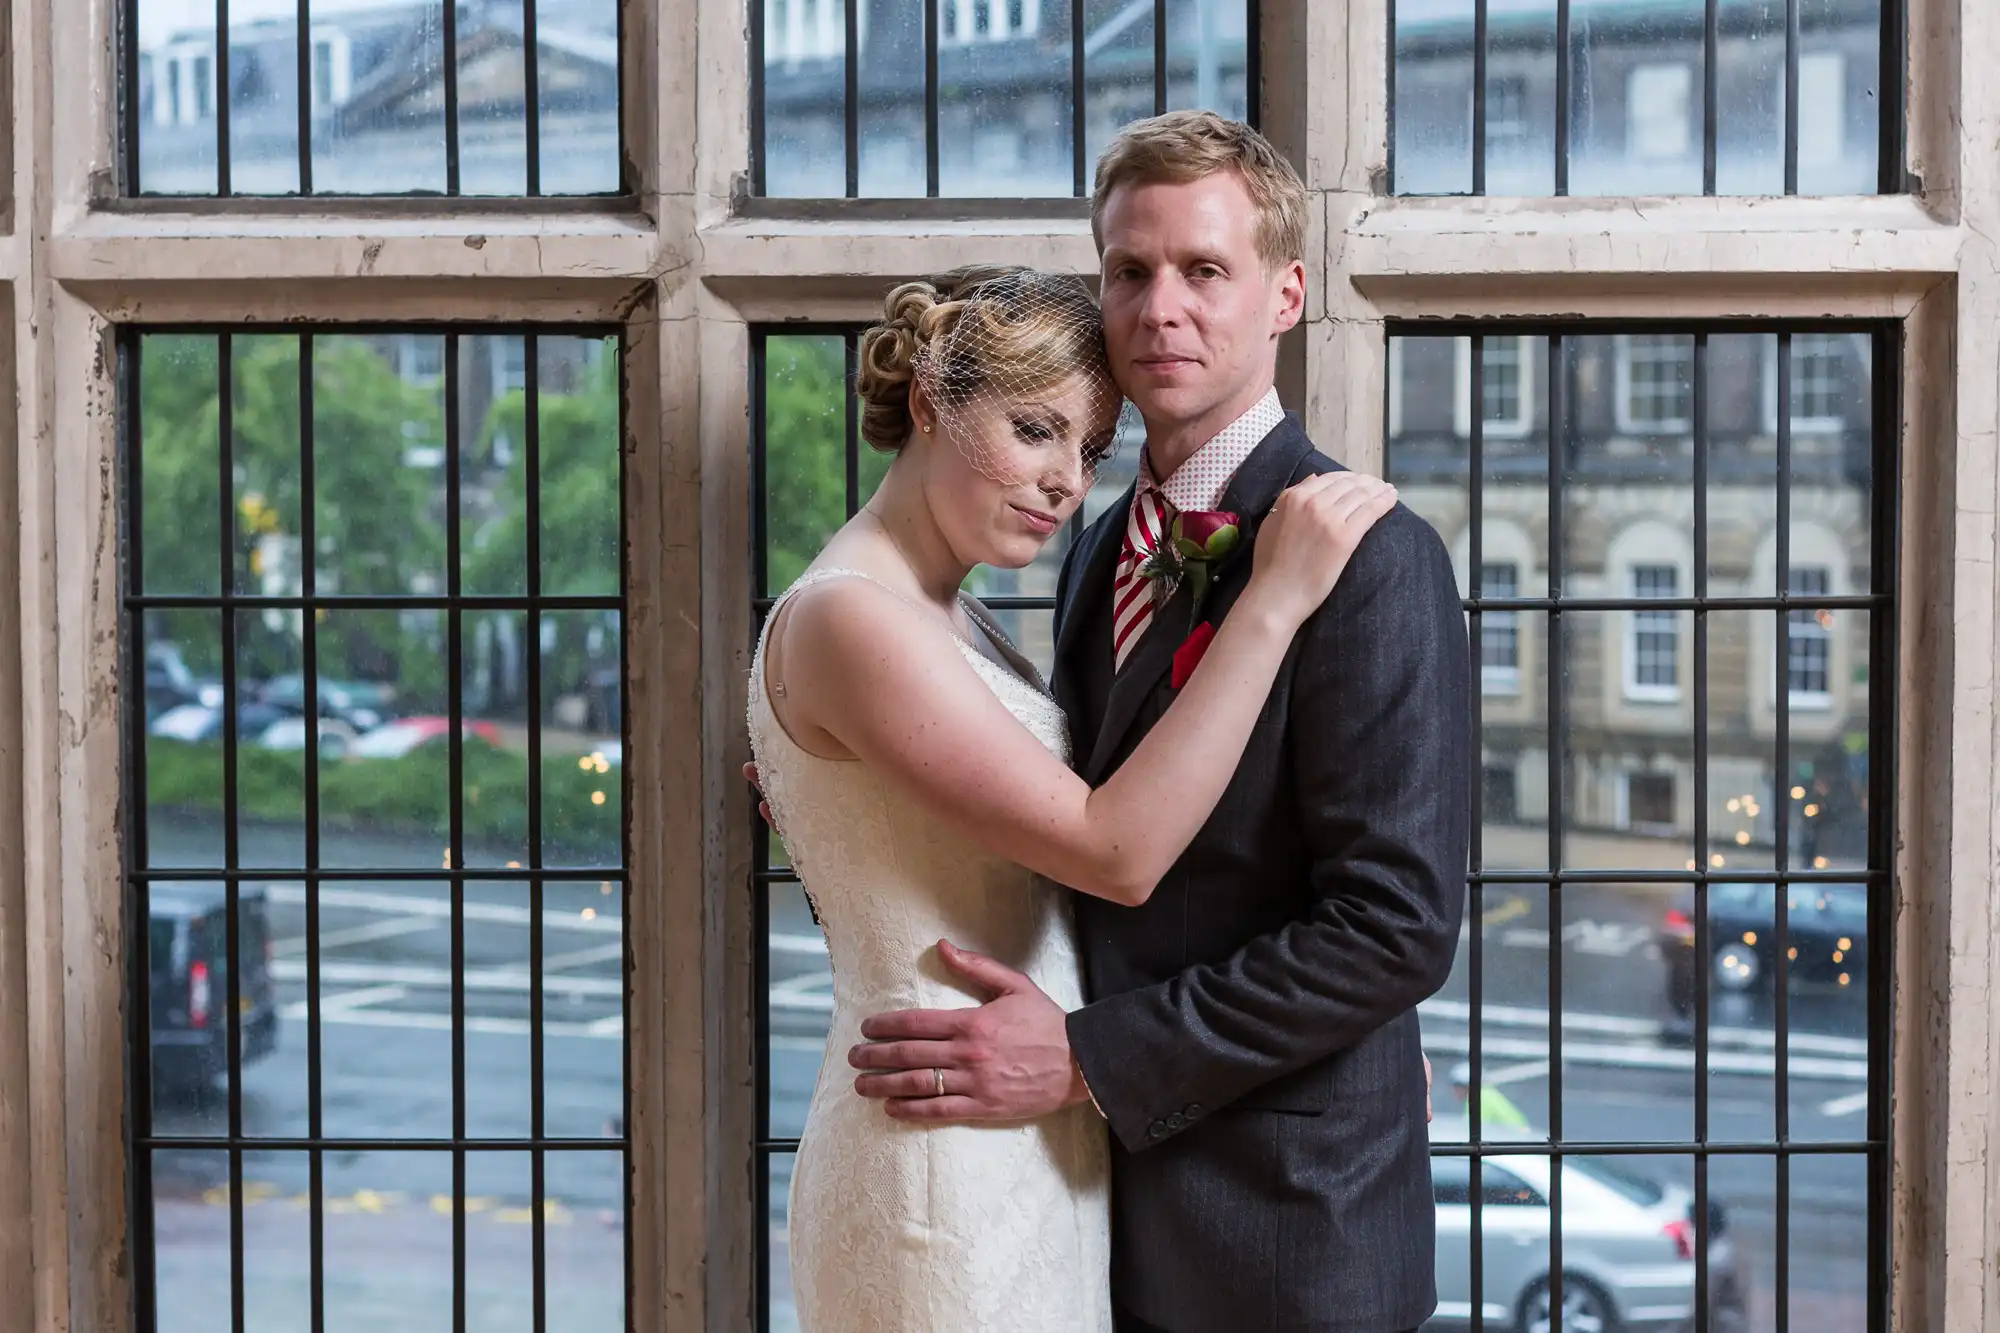 A newlywed couple embracing by a large window, with the woman in a white dress leaning against the man in a suit, overlooking a city street.